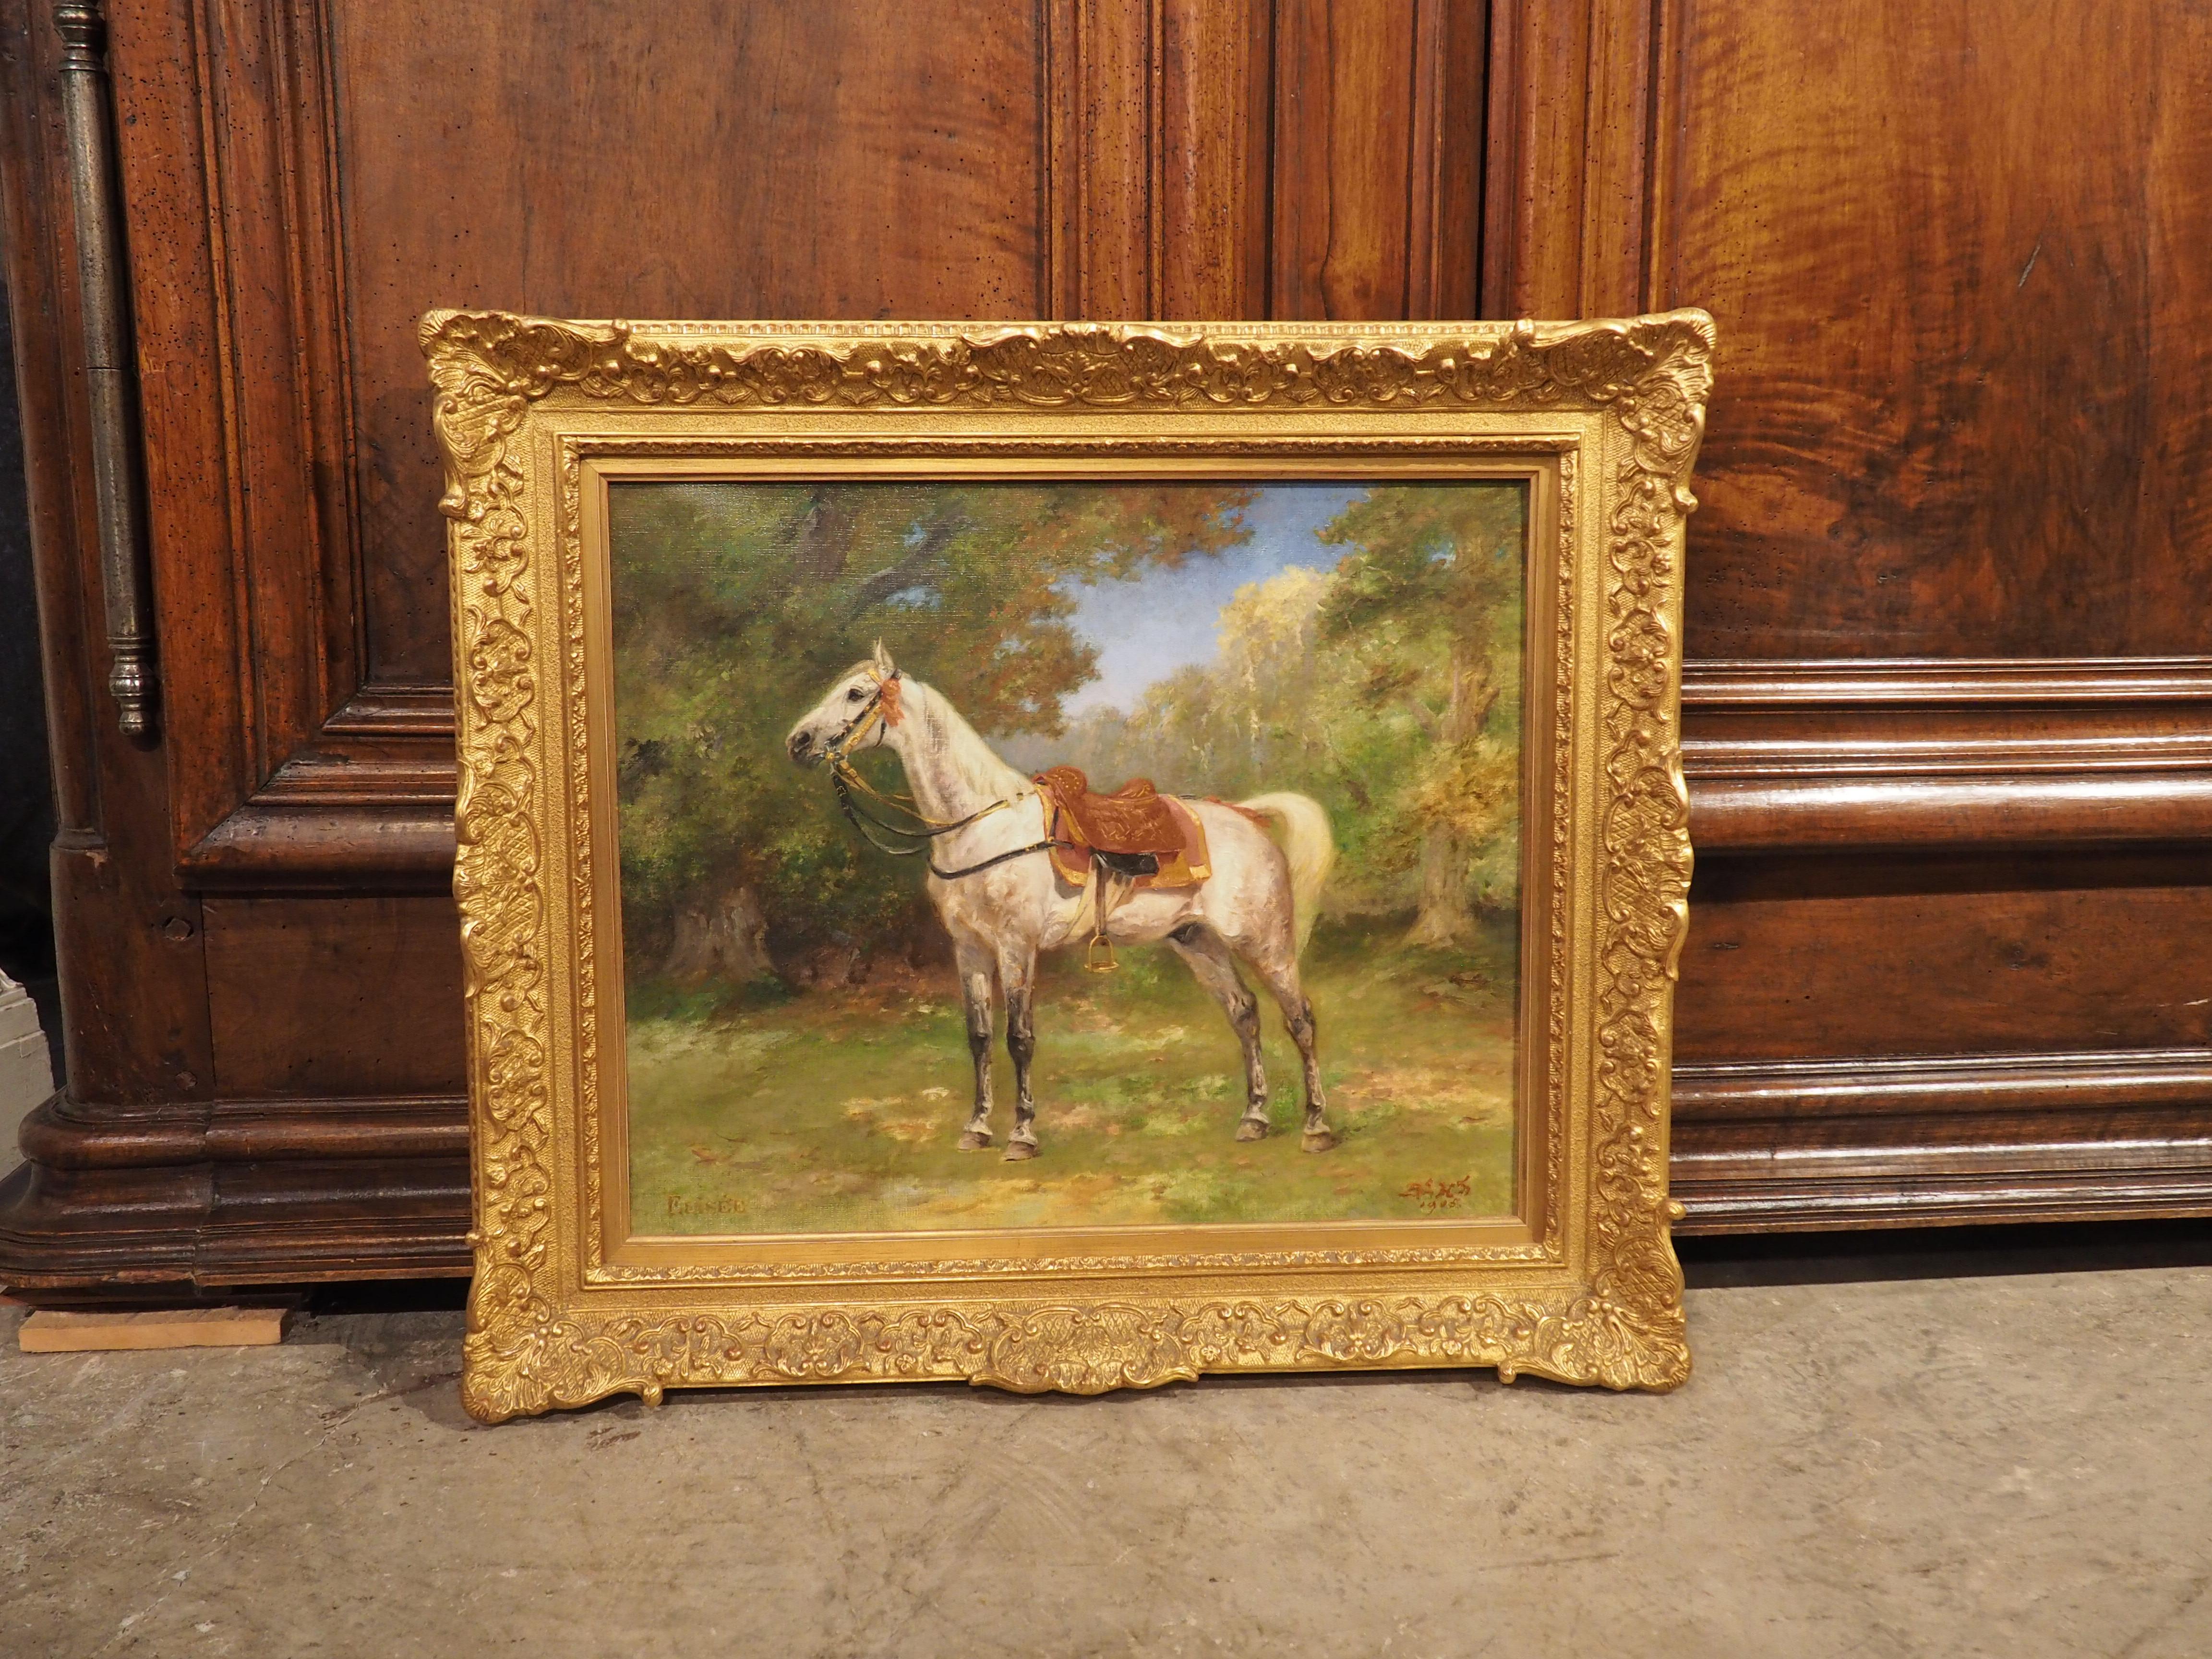 This charming French school portrait of a saddled horse was painted in 1905. It might have been commissioned by the horse’s owner, as the name “Elysee” is inscribed in the lower left corner. There is an illegible signature in the lower right corner